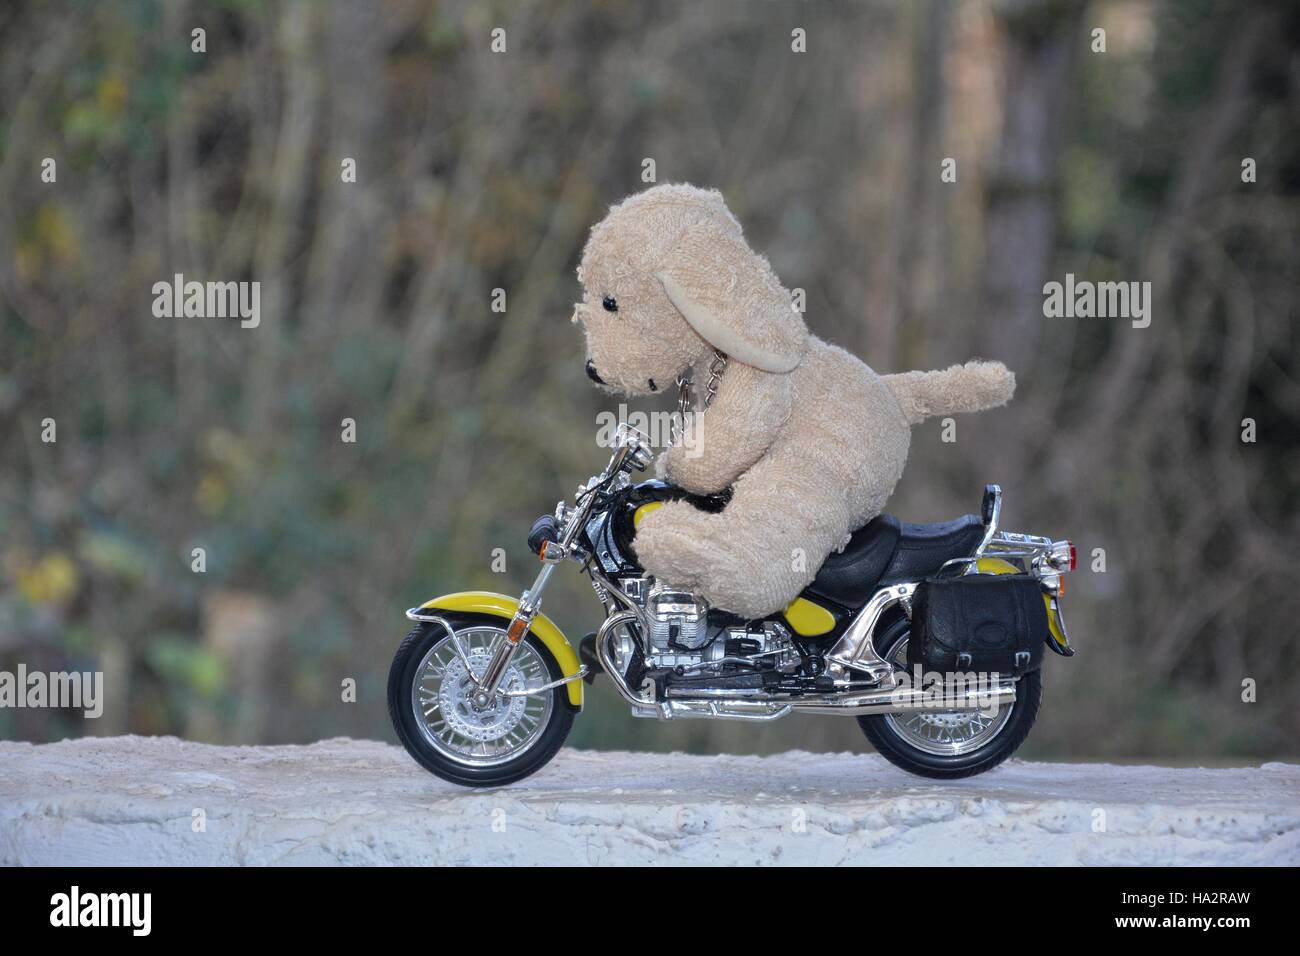 Dog soft toy sits on motorcycle outside Stock Photo